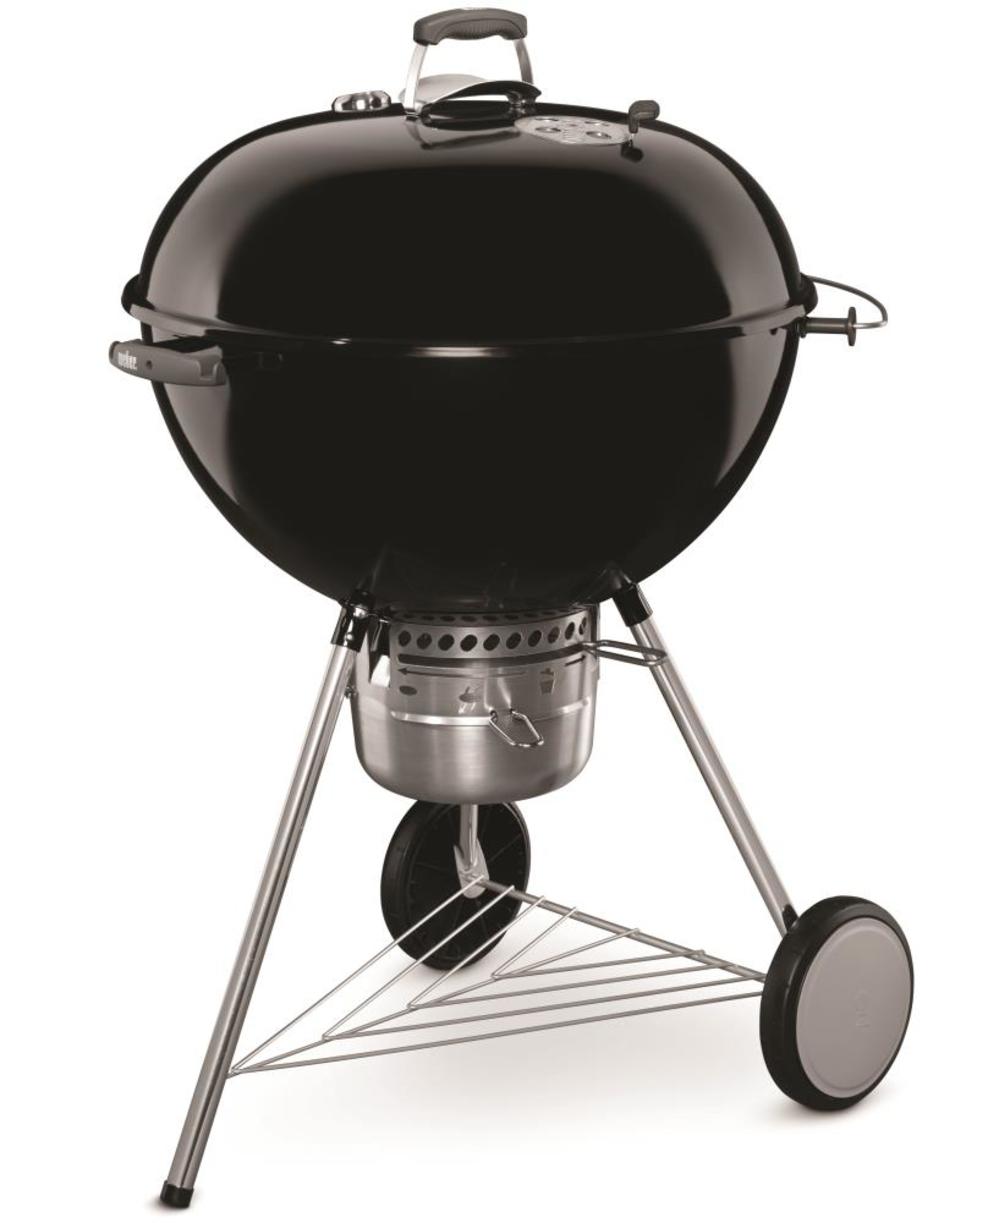 Weber 16401001 Original Premium Charcoal Kettle Grill, Black, 26 In. - Quantity 1 - image 1 of 3